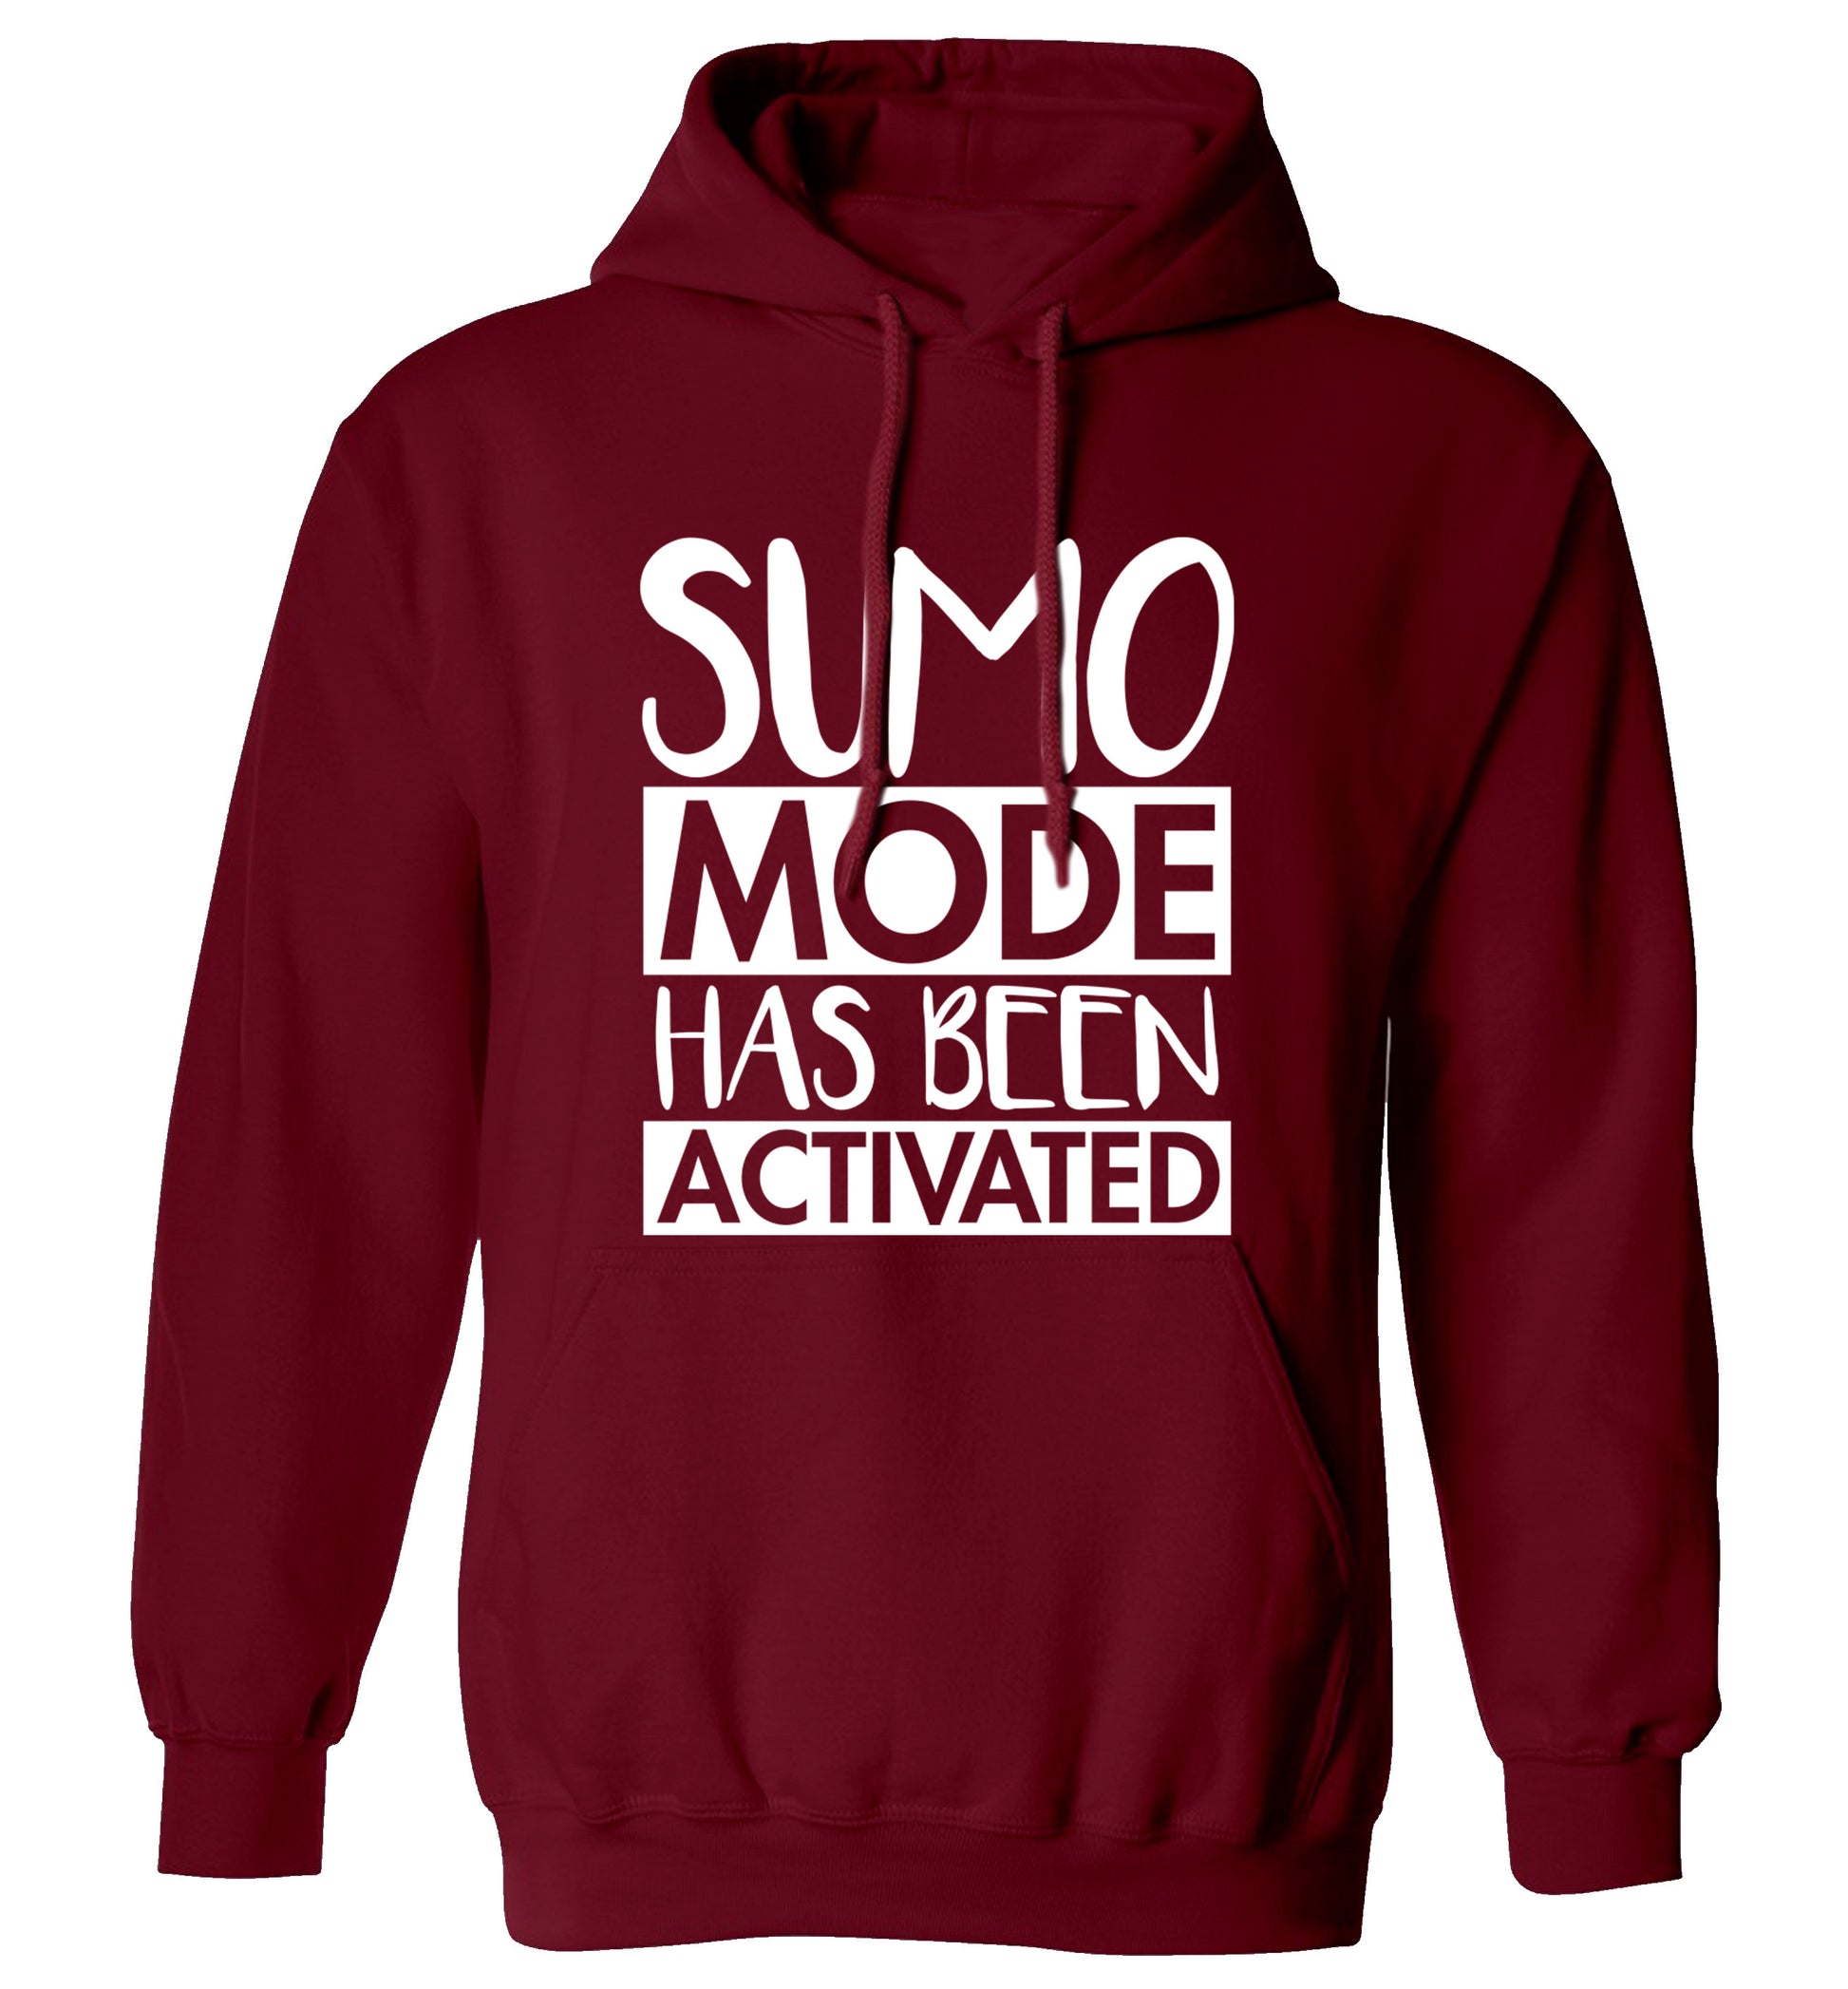 Sumo mode activated adults unisex maroon hoodie 2XL